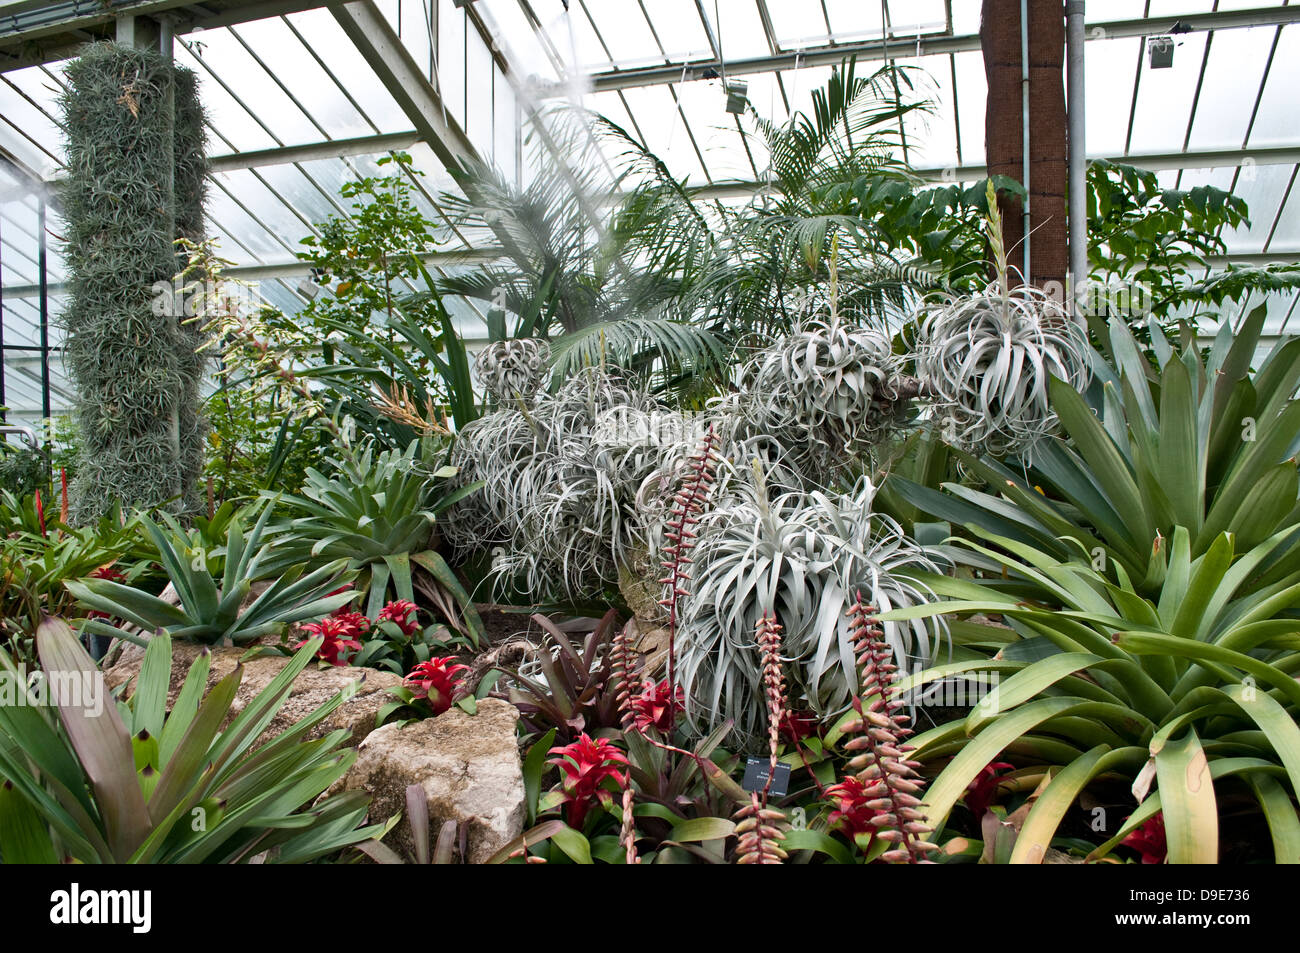 Princes of Wales Conservatory - tropical section with bromeliads, Kew Royal Botanic Gardens, London, UK Stock Photo